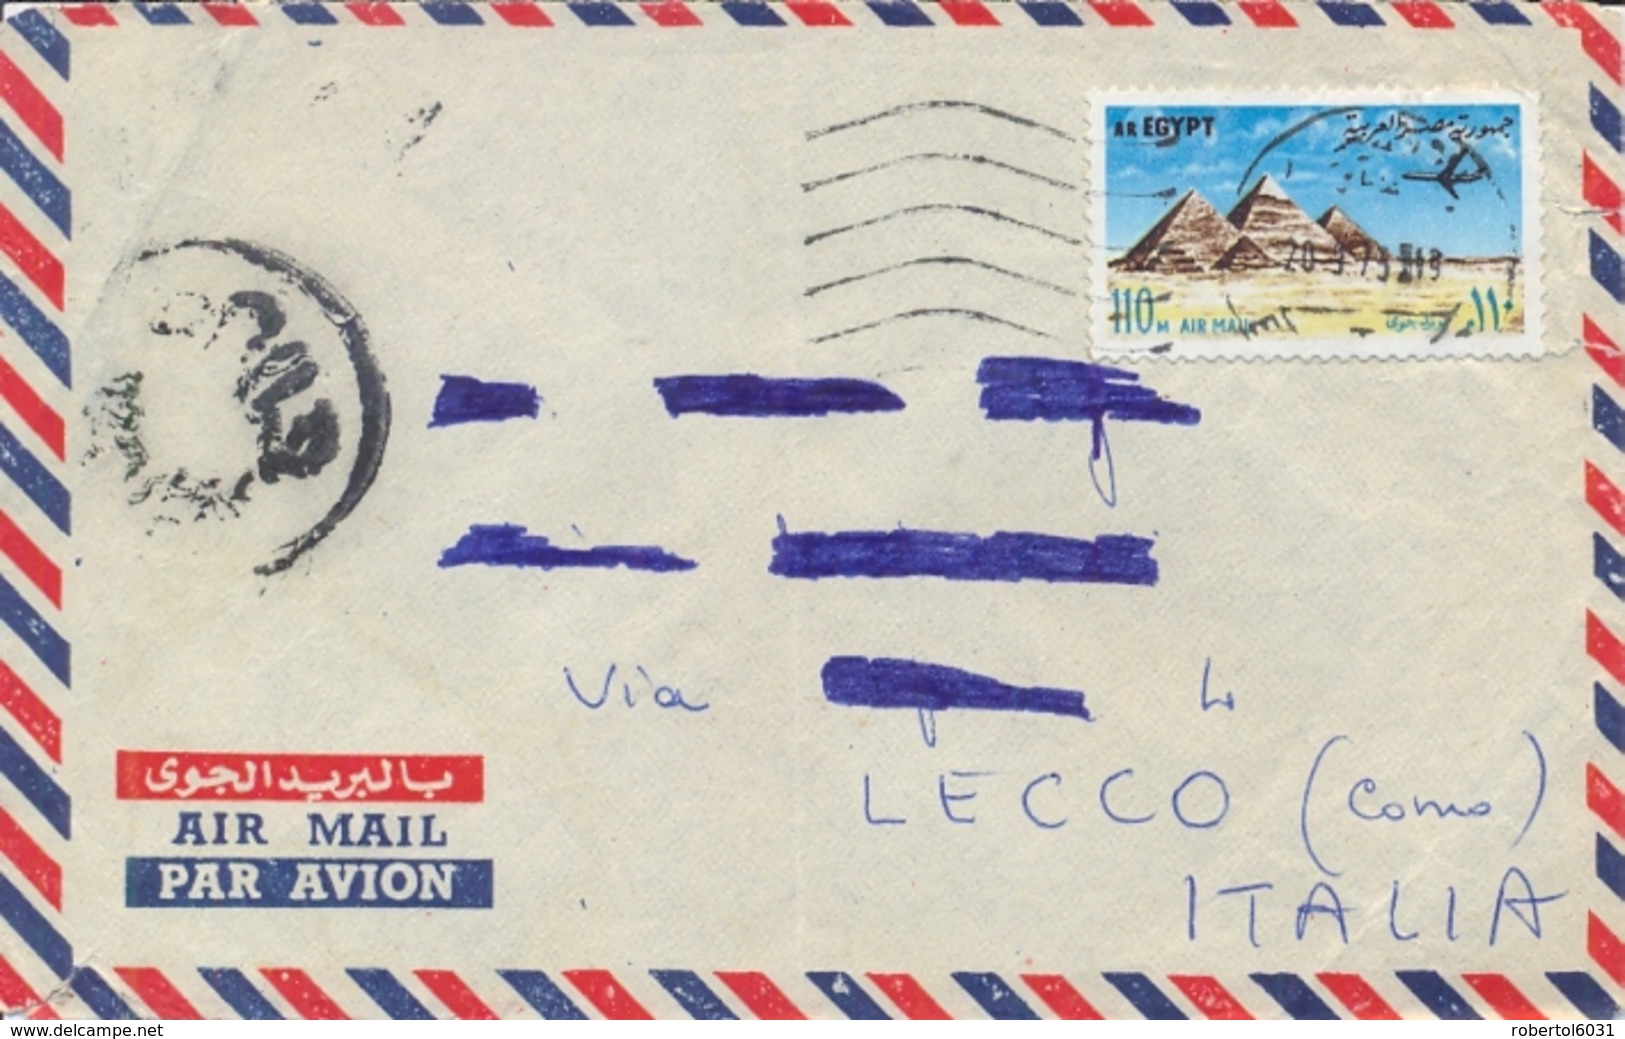 Egypt 1973 Cover To Italy With Airmail Stamp 110 M. Pyramids - Archeologia